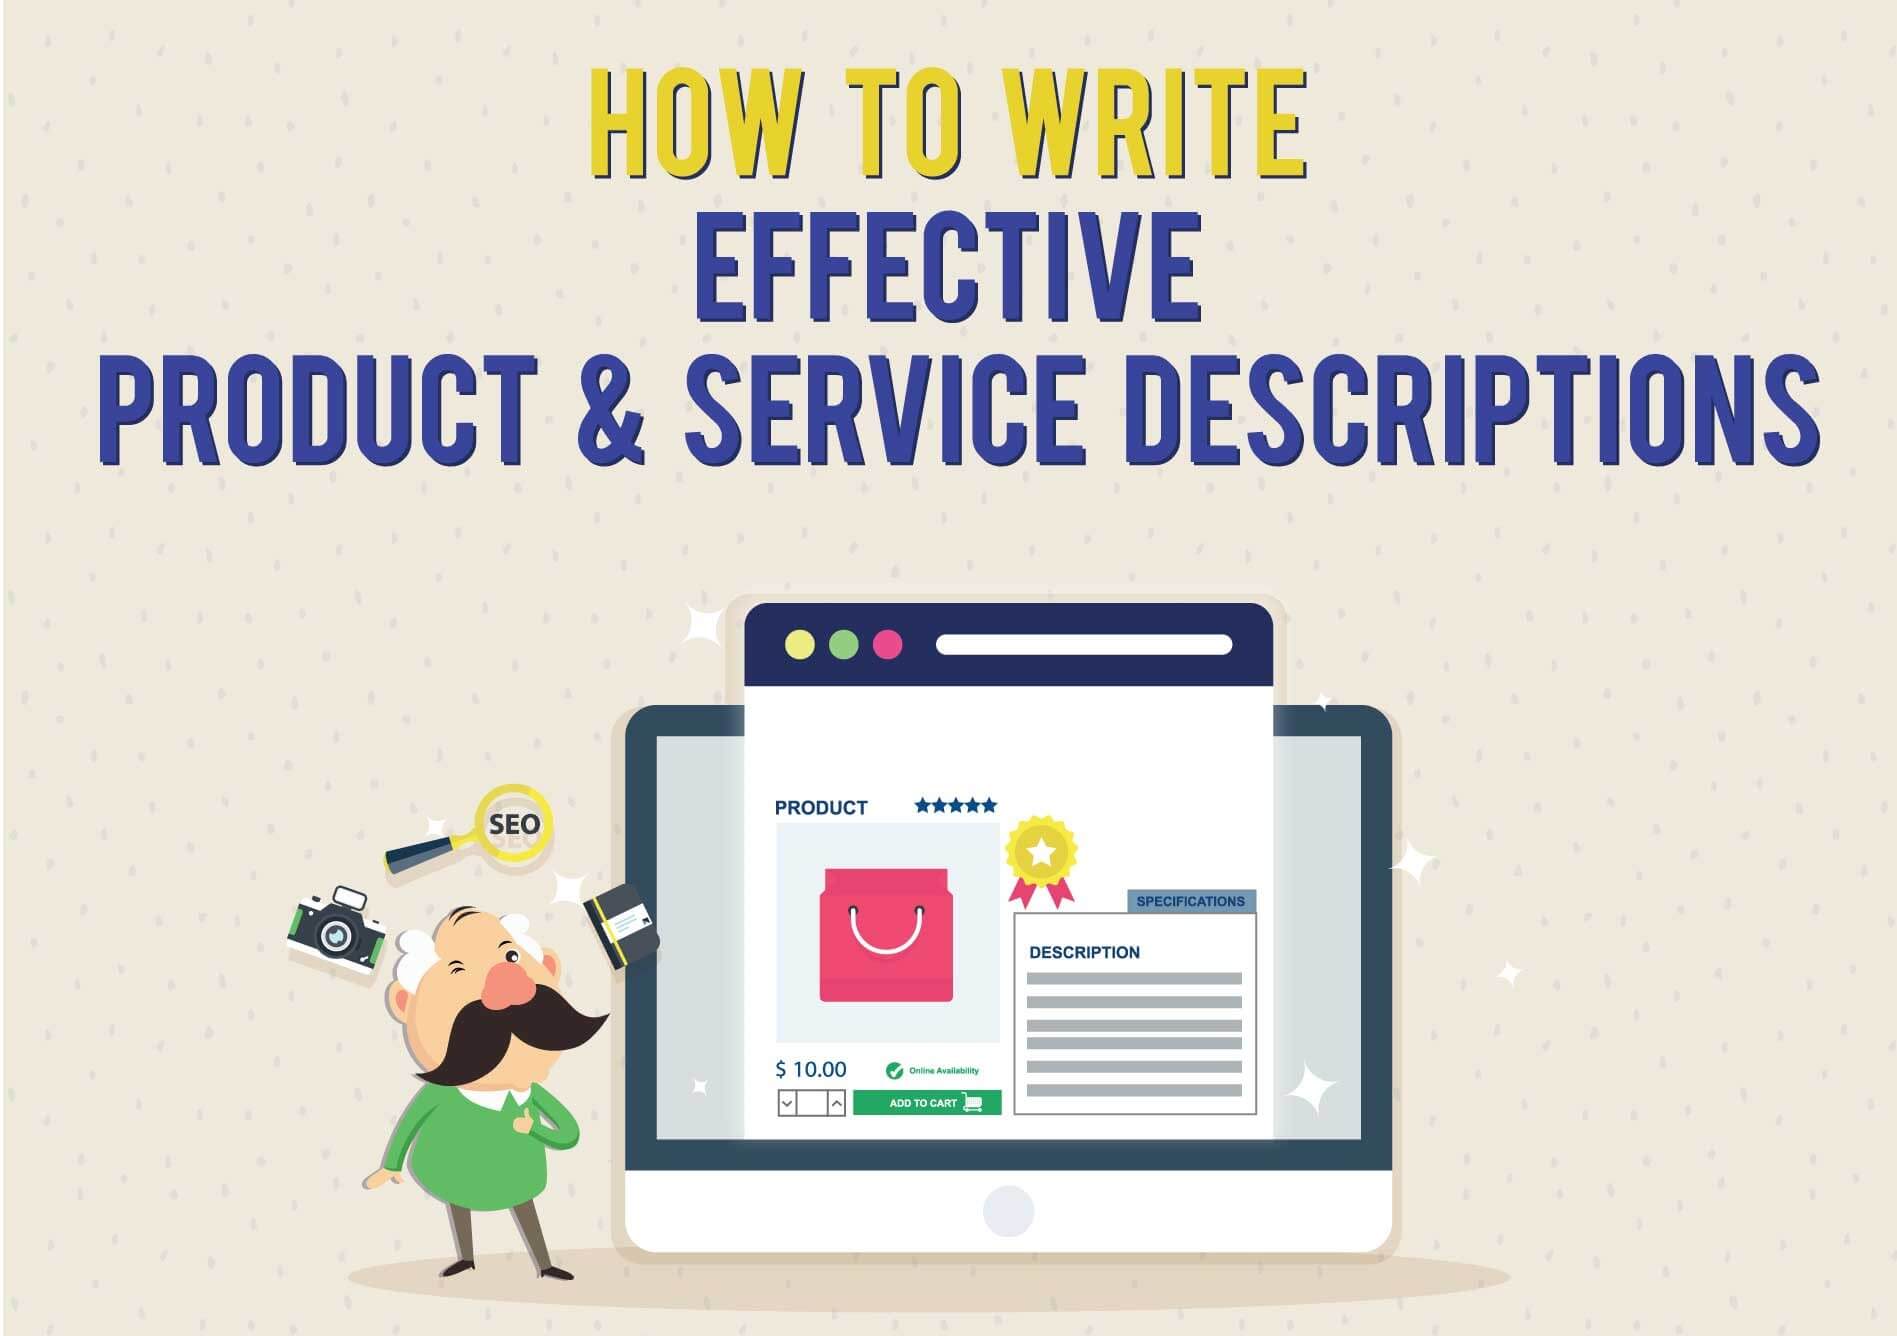 How to write effective product and service descriptions